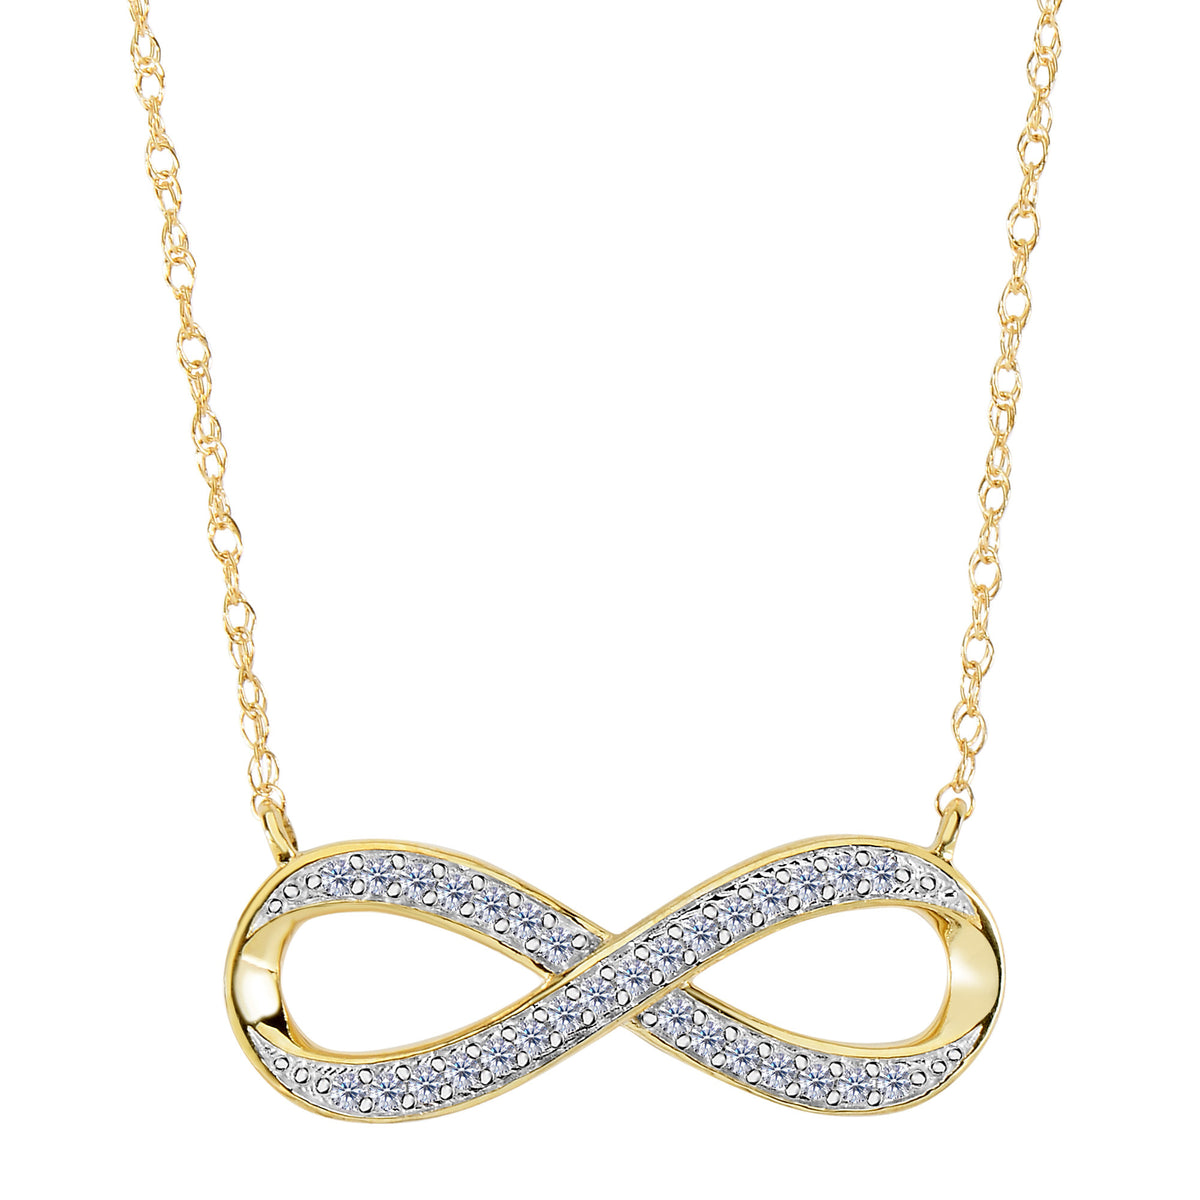 14K Yellow Gold With 0.10 Ct Diamonds Infinity Necklace - 18 Inches fine designer jewelry for men and women